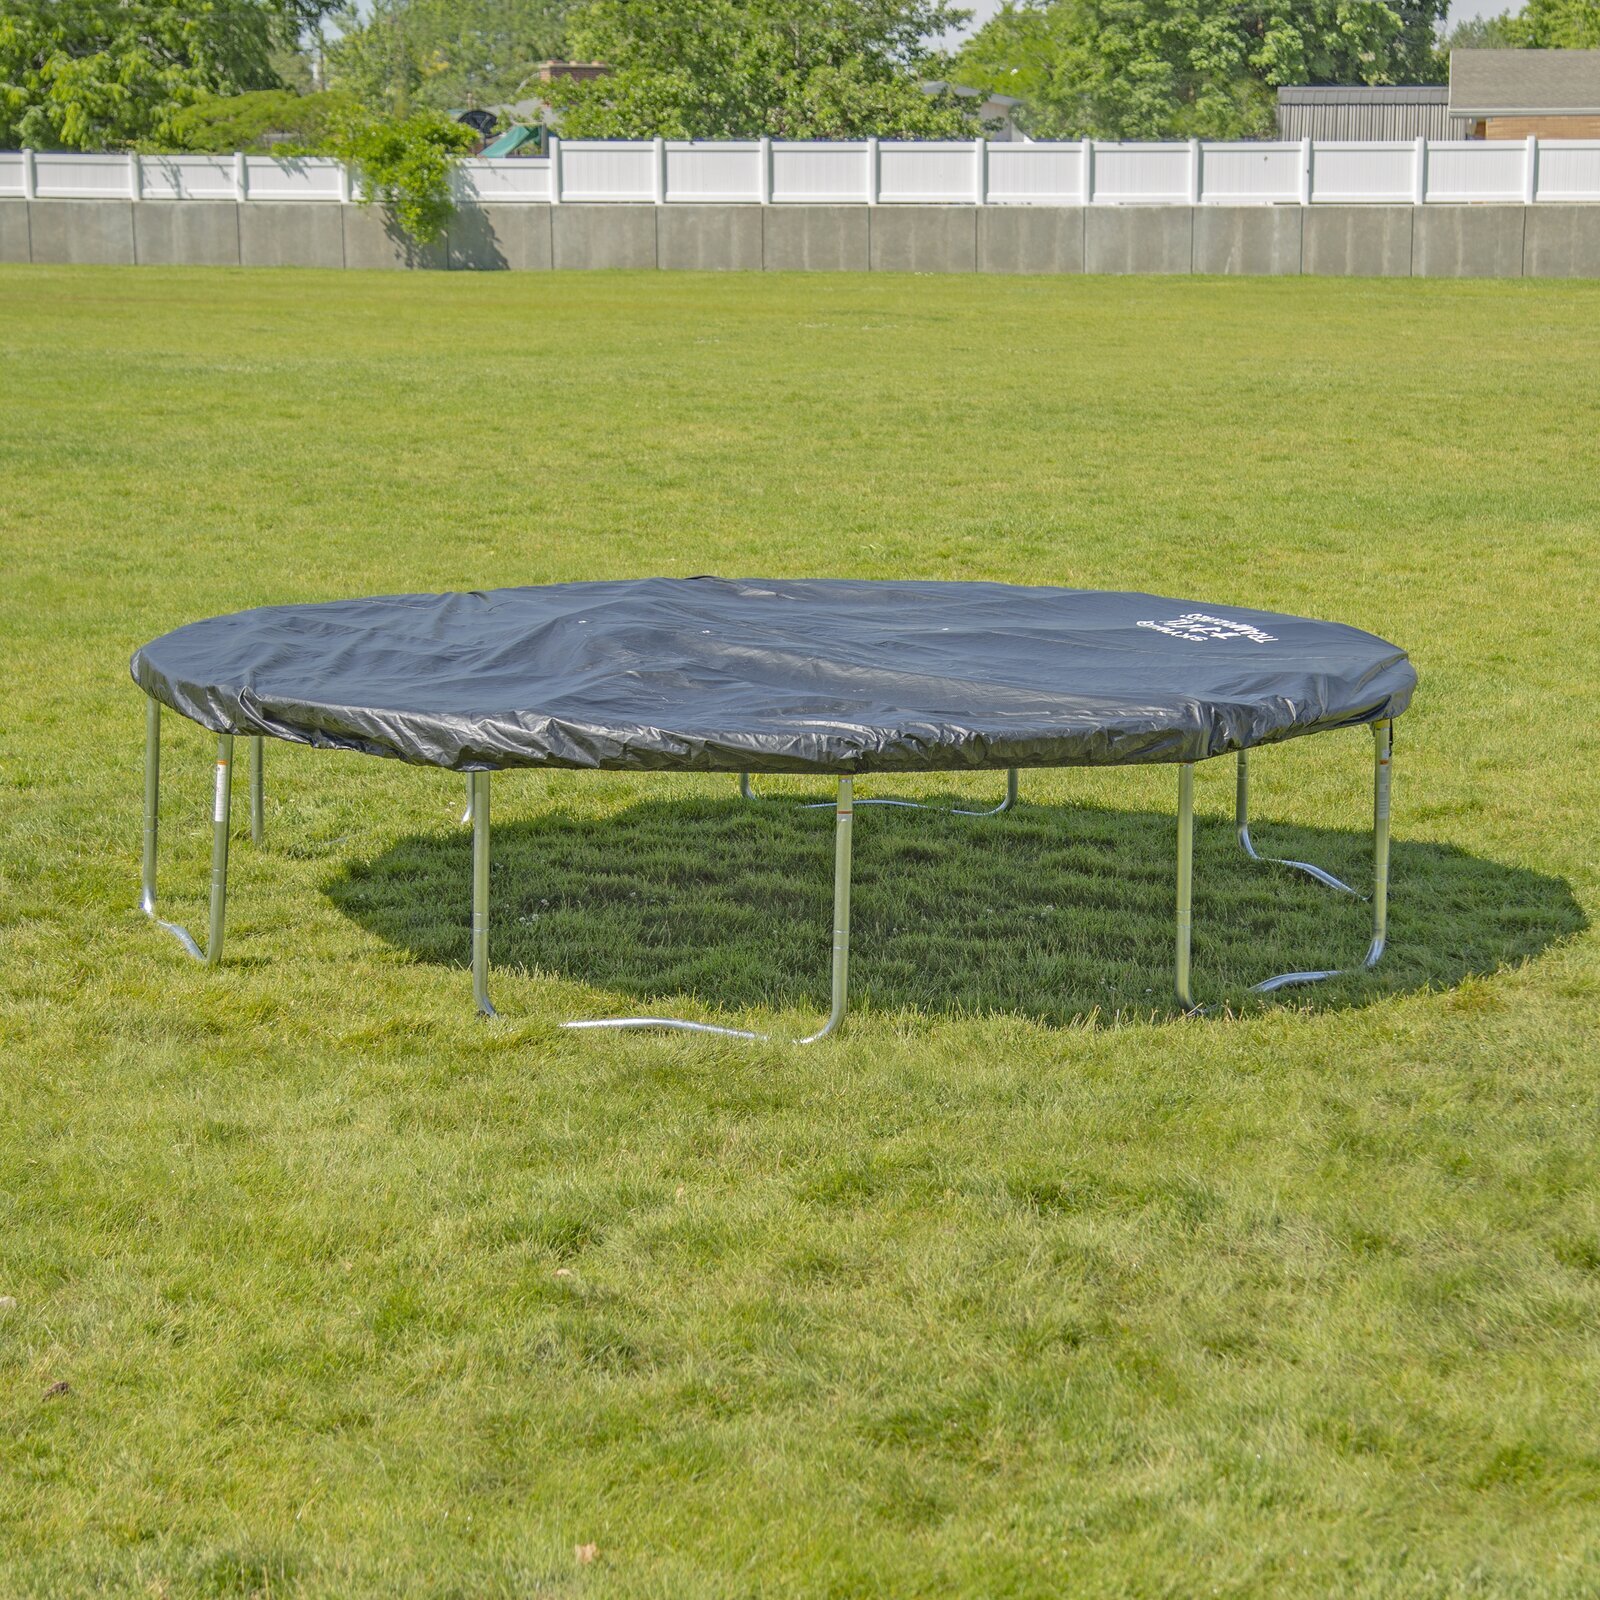 Protective Cover for Large Trampolines